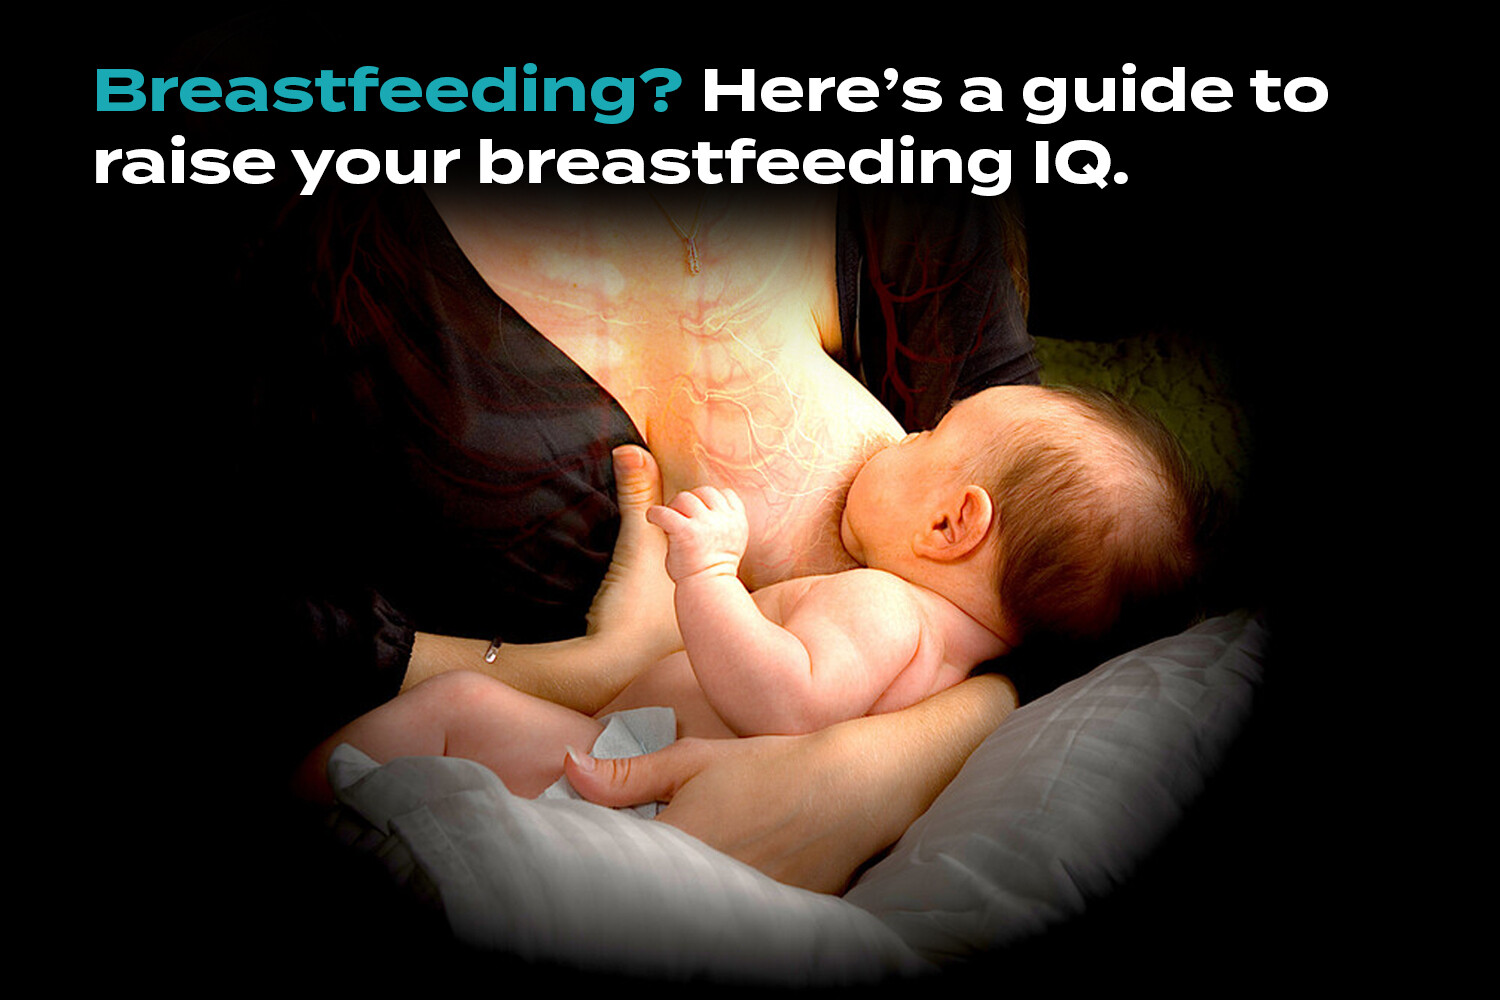 About Breastfeeding and Breast Milk - StoryMD